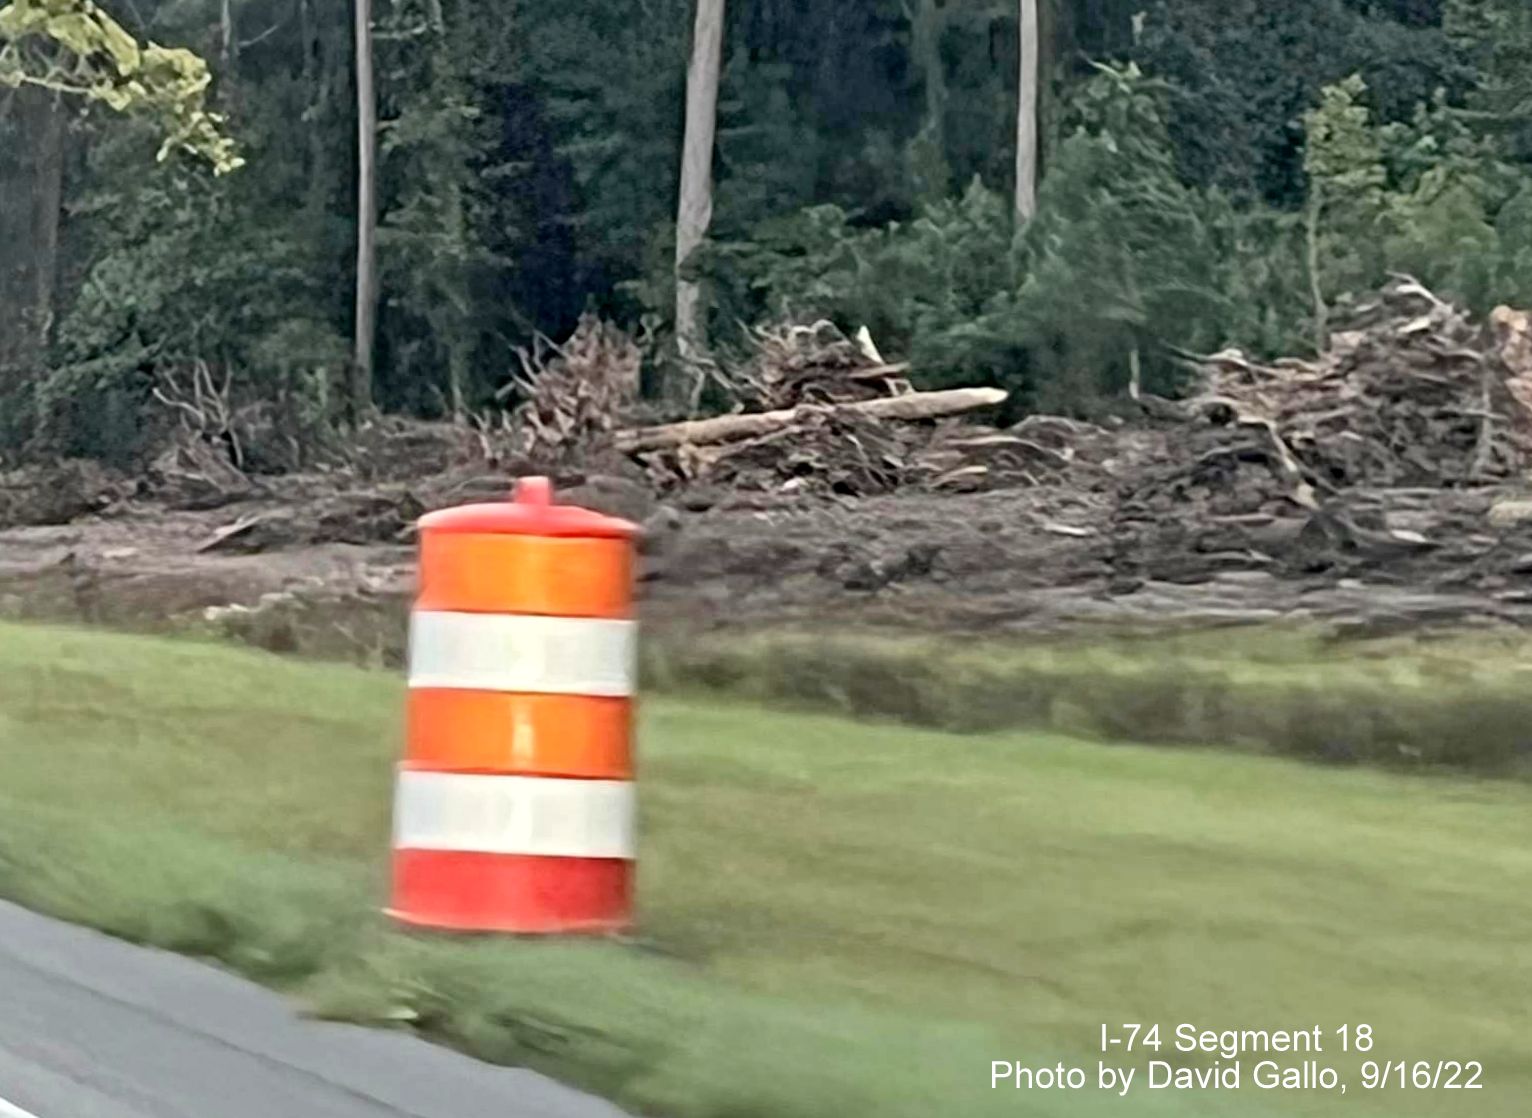 More trees cut down along US 74 as part of new Lake Waccamaw interchange construction, by David Gallo, September 2022